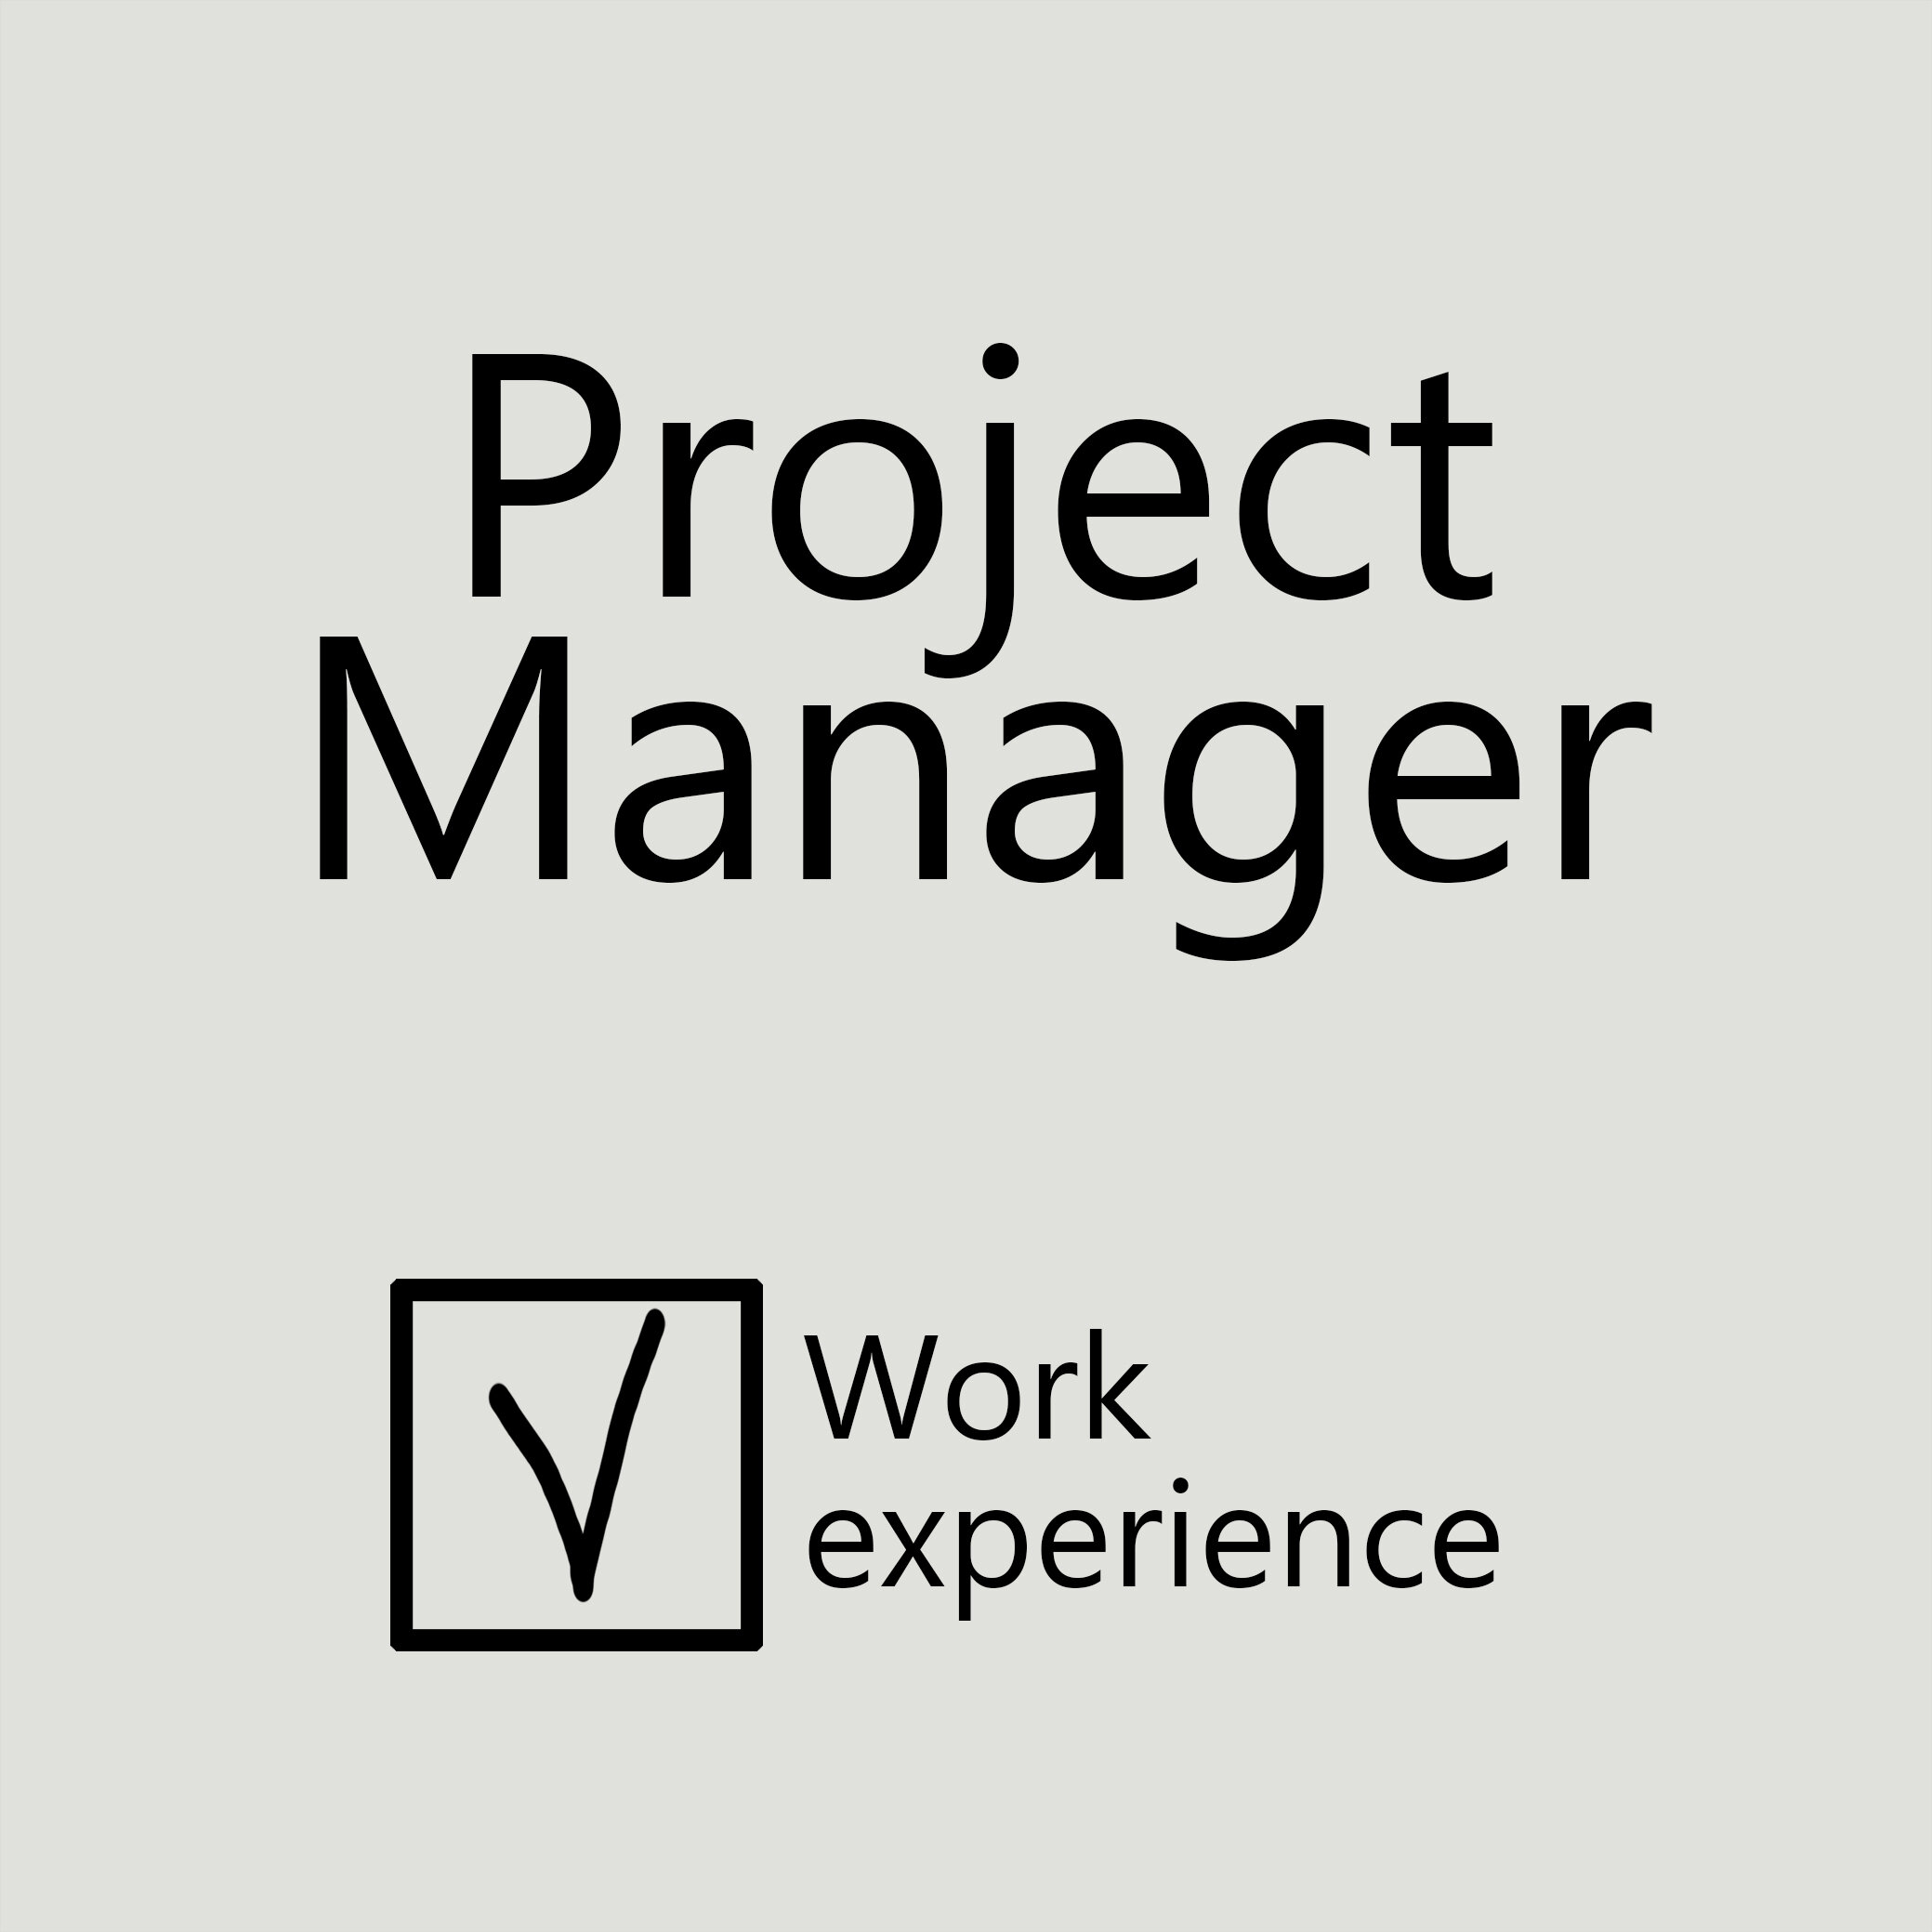 Project manager.jpg